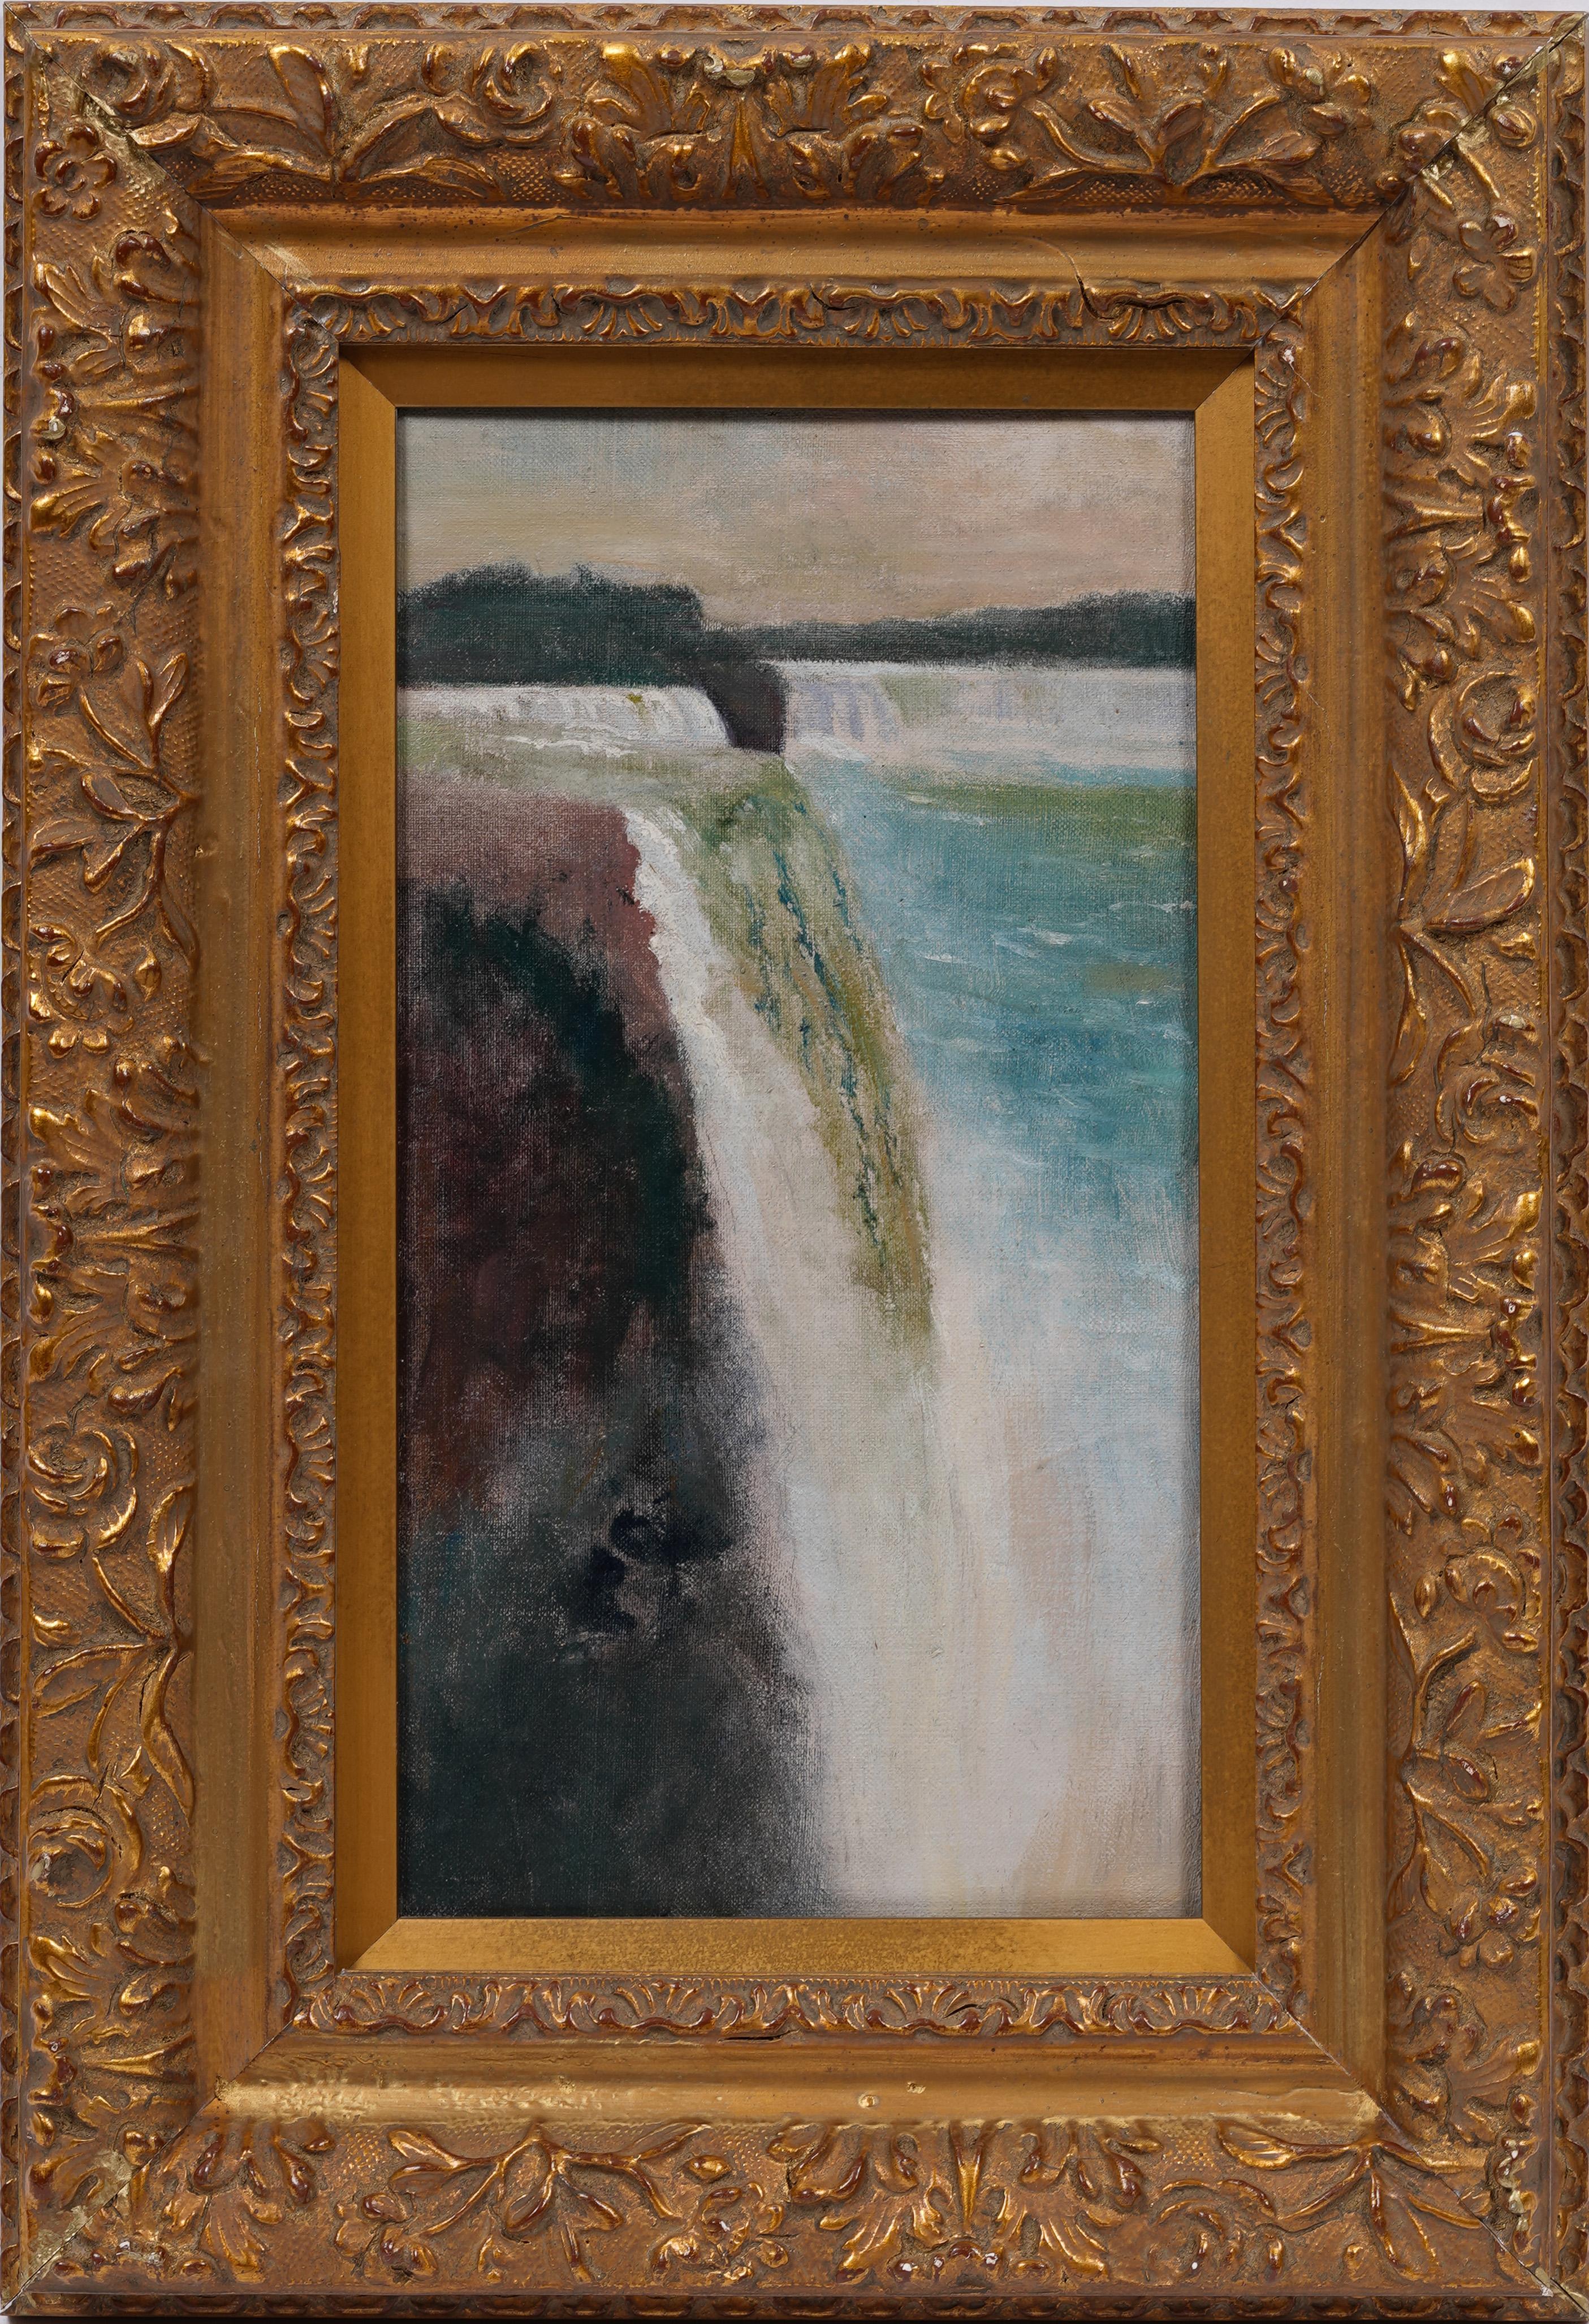 Unknown Landscape Painting - Antique American Impressionist Niagara Falls Landscape Framed Oil Painting